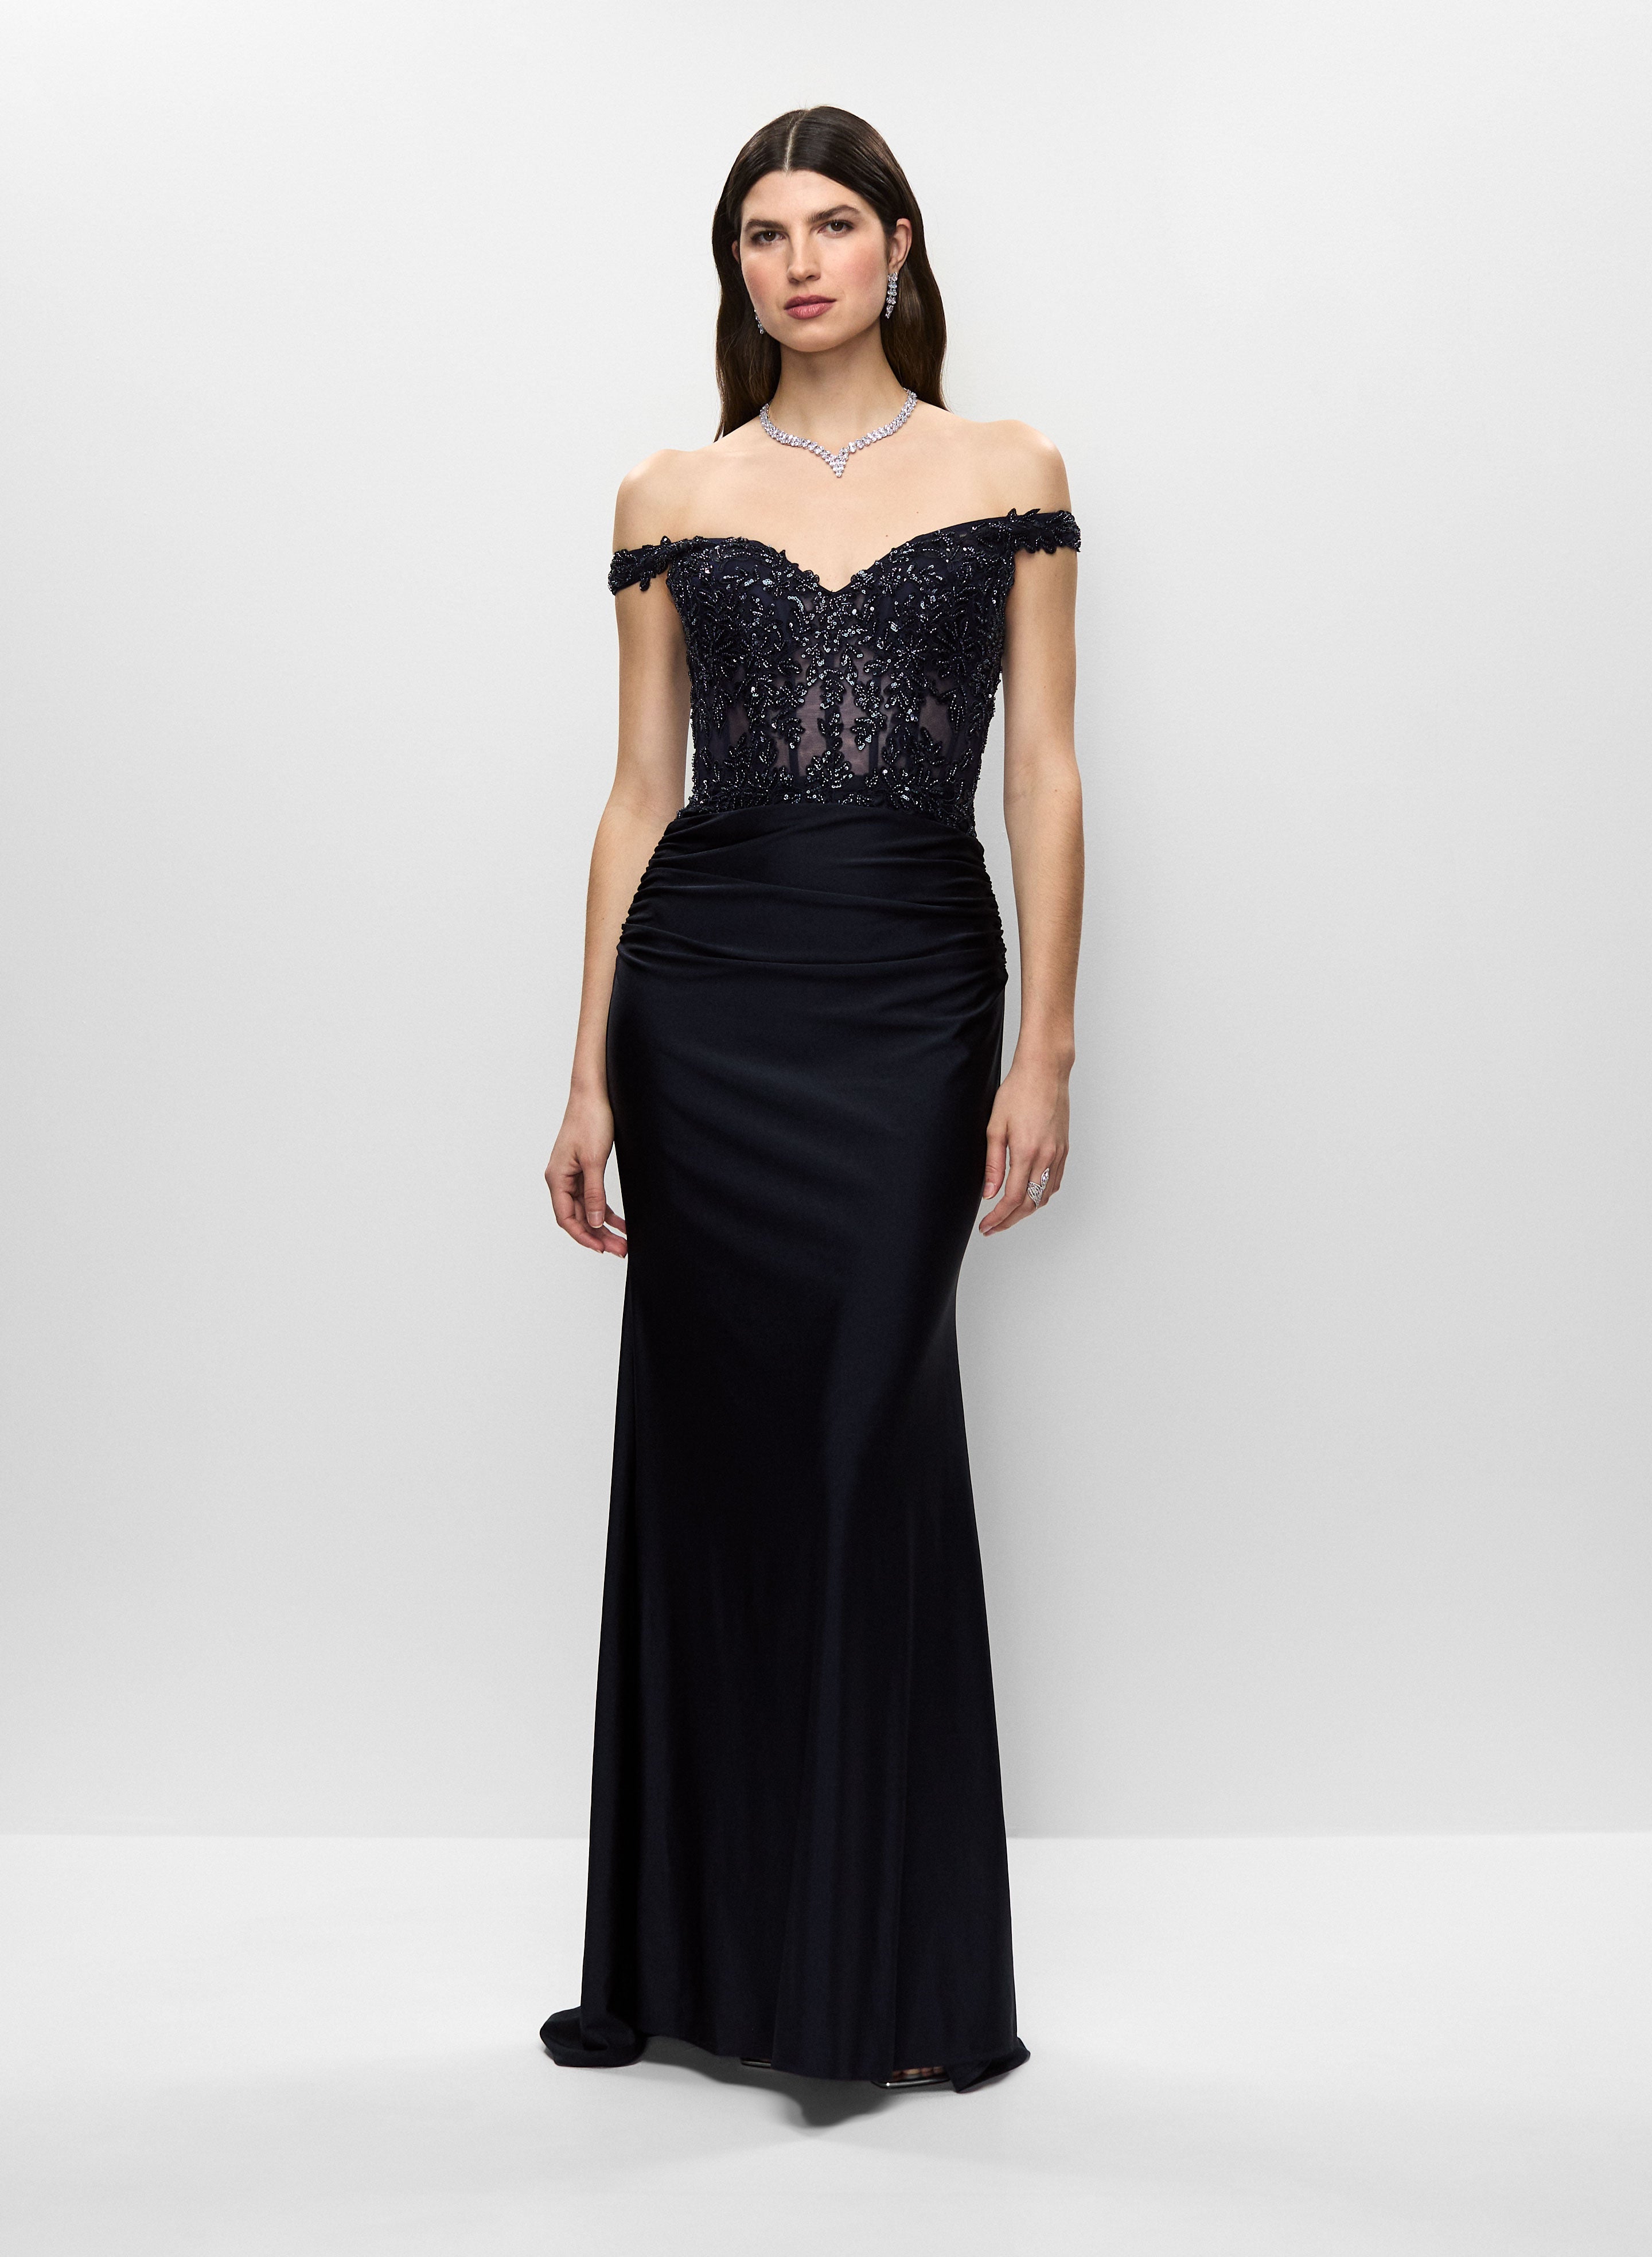 Corset Style Sequinned Gown